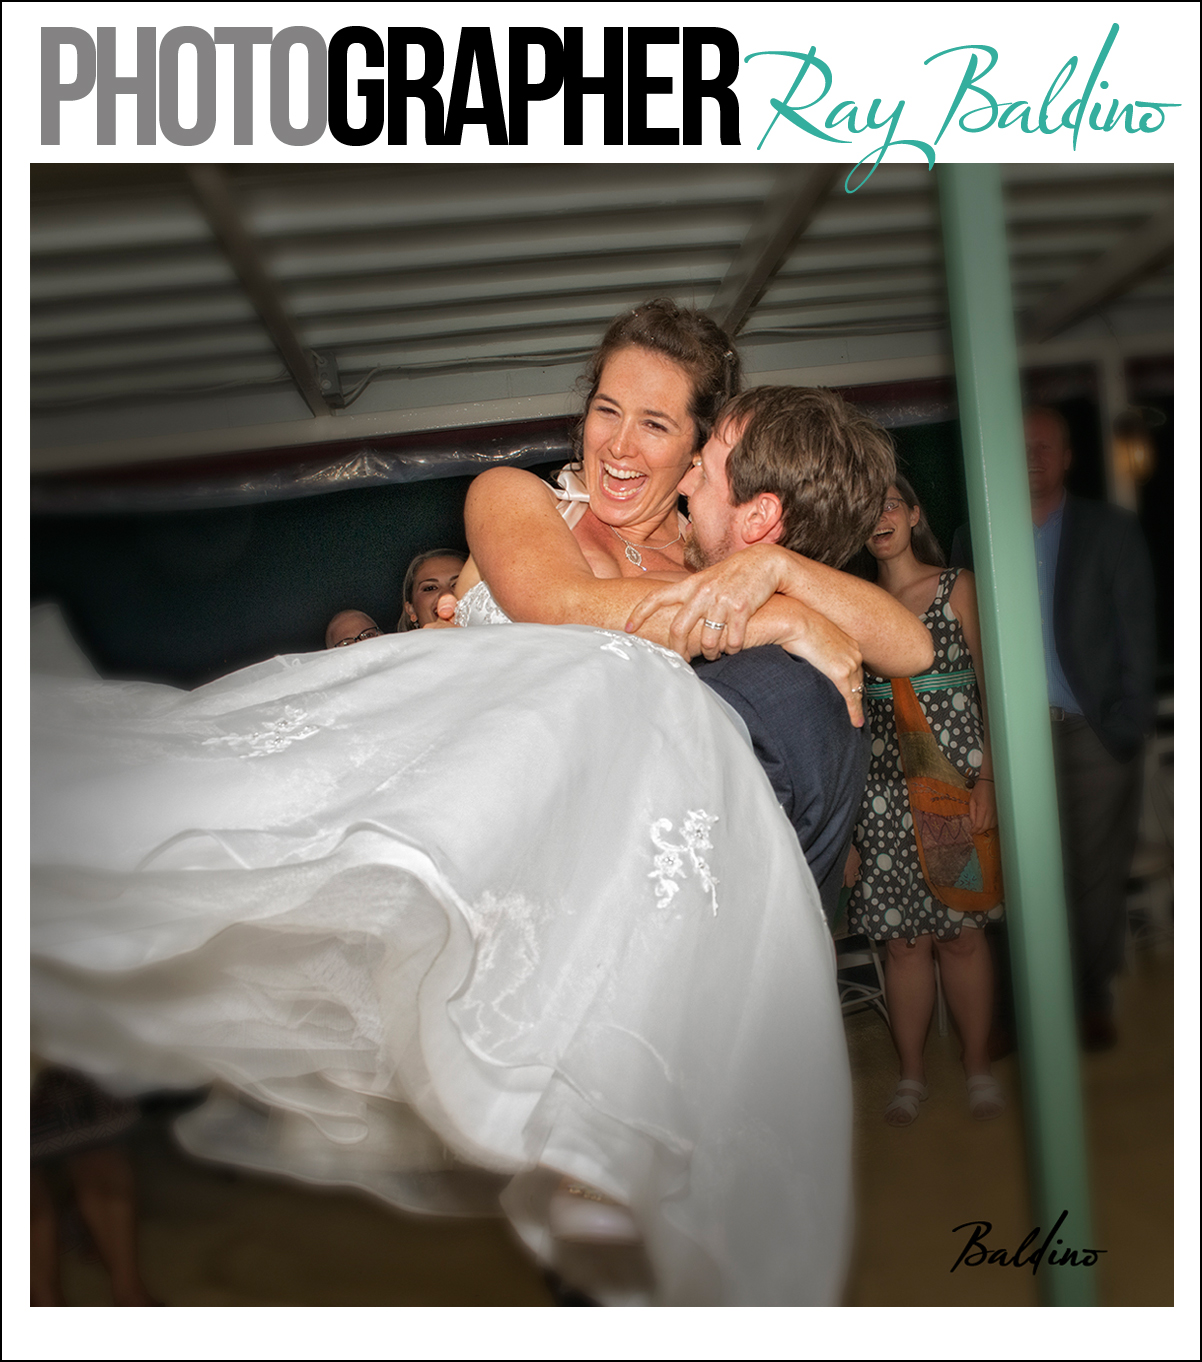 this-image-from-ray-baldino-photography-was-taken-on-the-indian-river-queen-in-cocoa-village-at-amy-and-m,ichaels-wedding-this-wedding-photograph-is-of-michael-lifting-and-twirling-amy-in-the-air-during-thier-first-dance